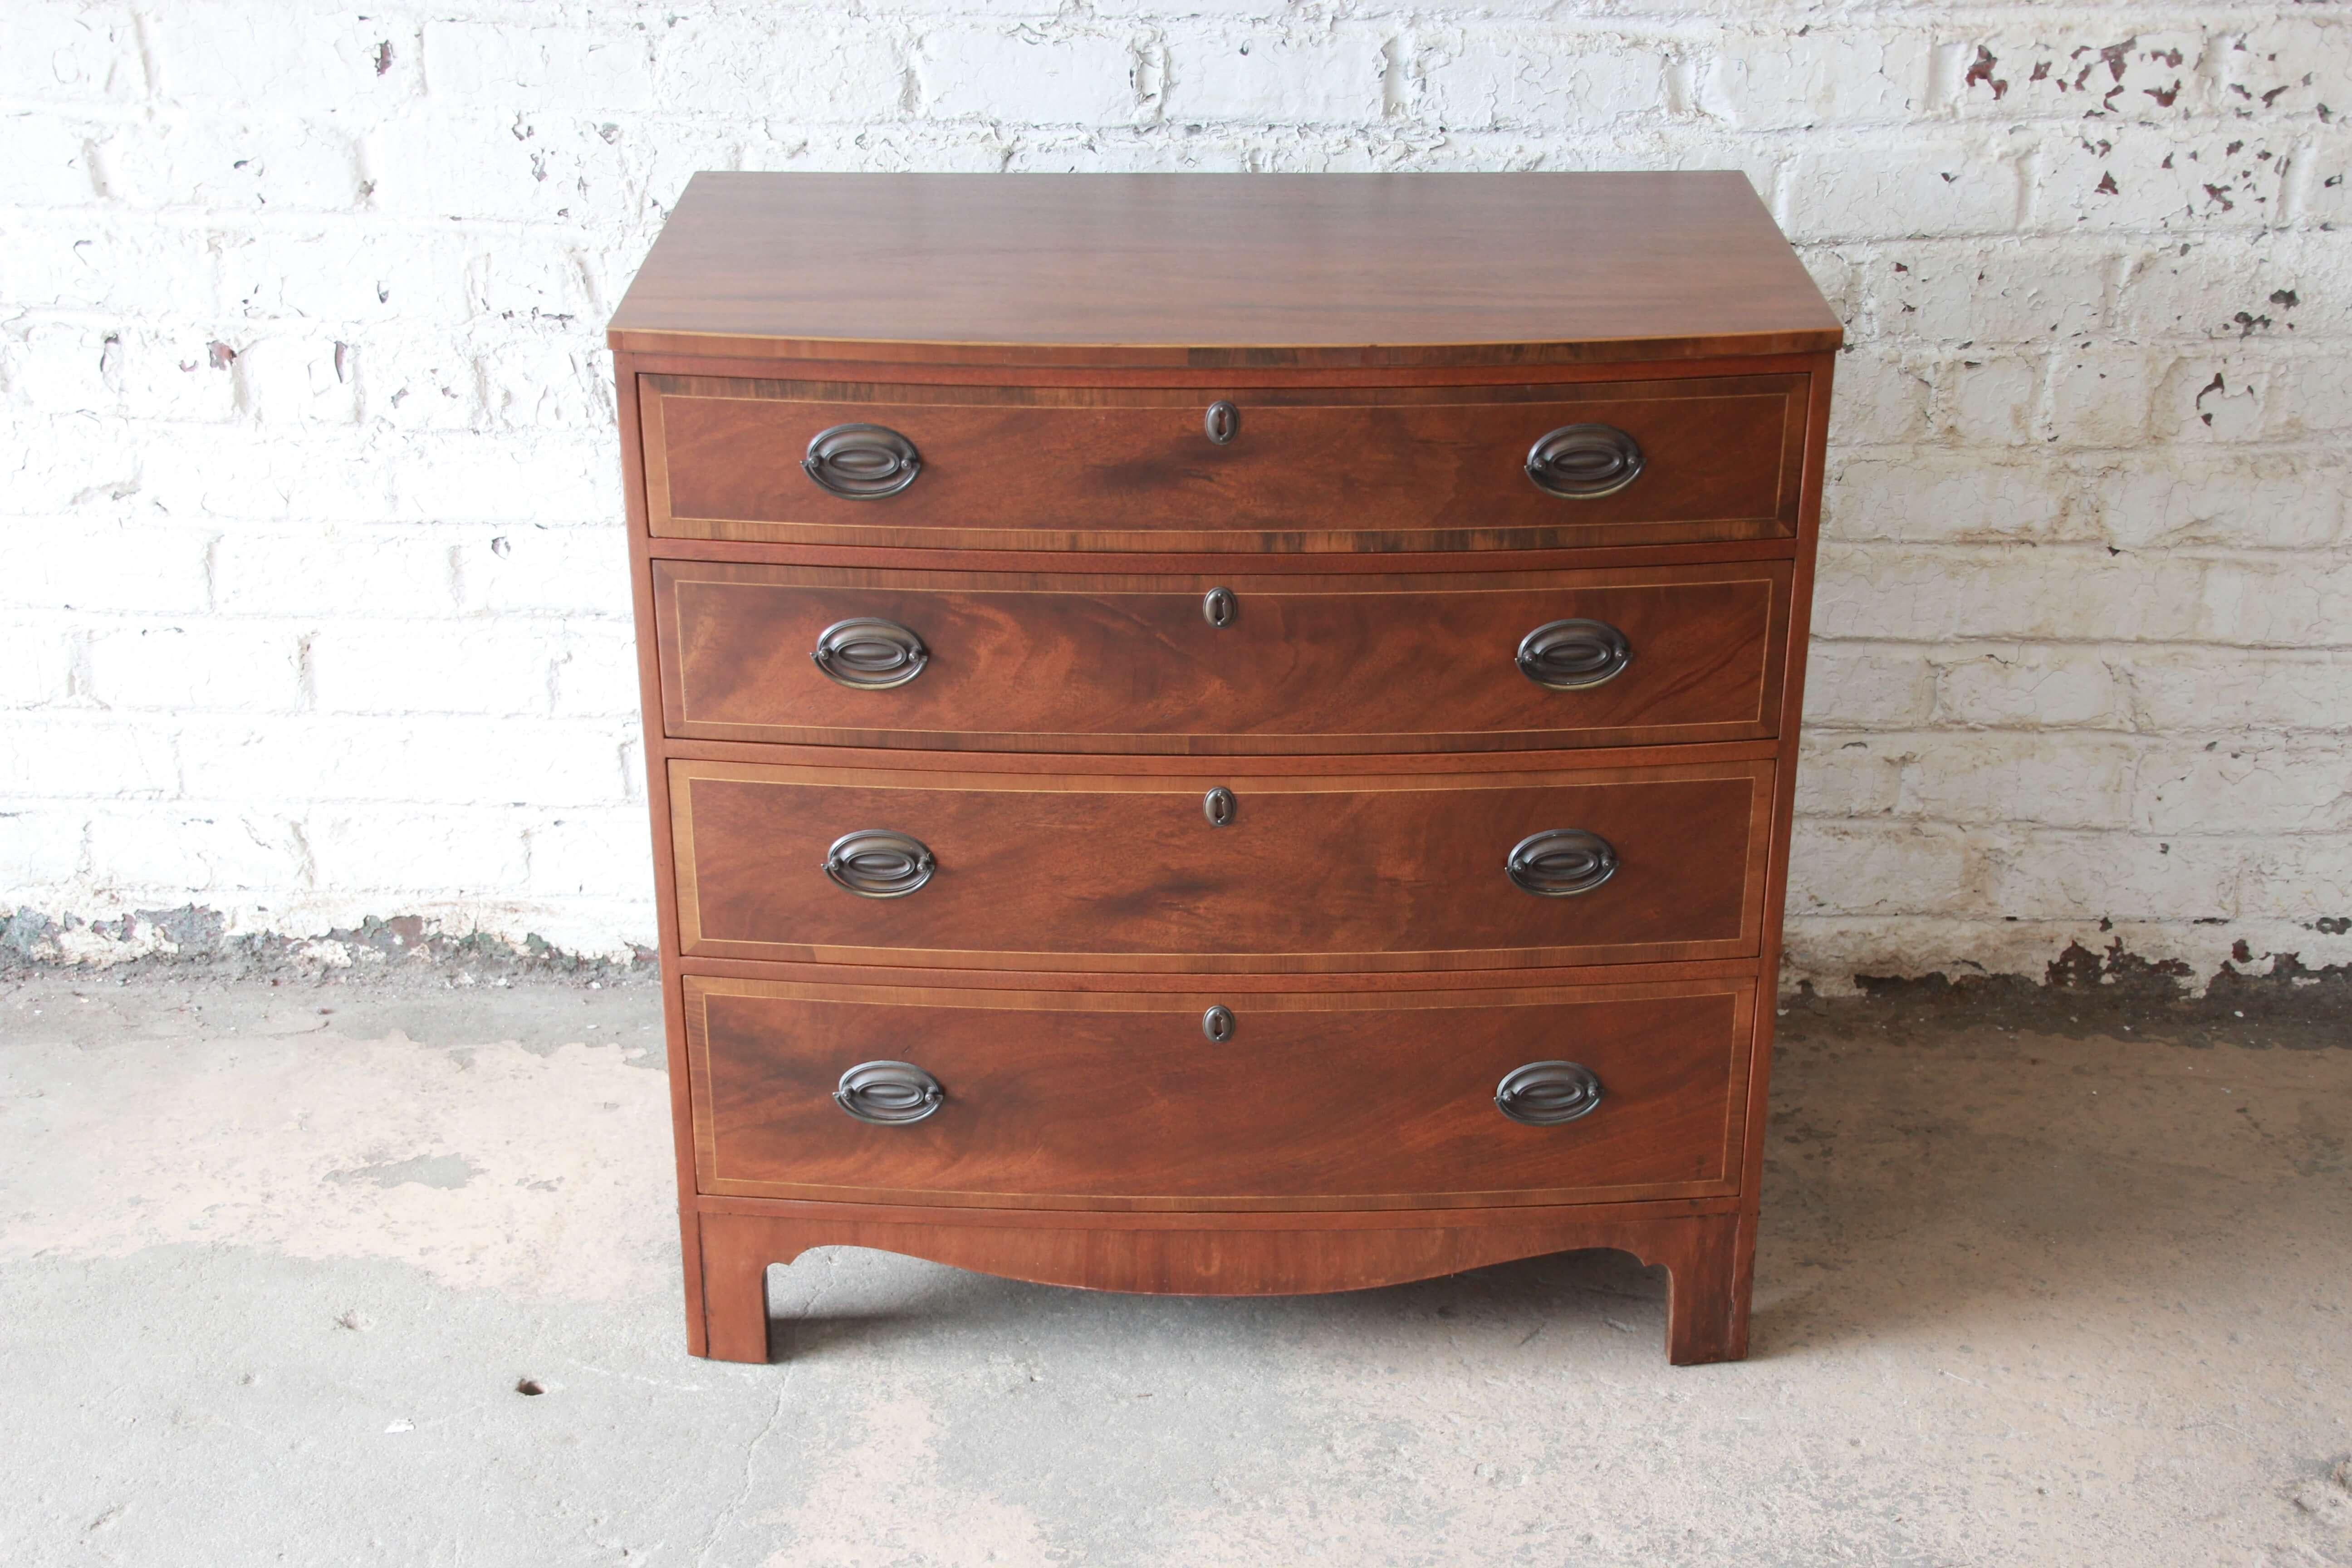 Offering a beautiful mahogany four-drawer chest of drawer by Baker Furniture. The chest display a stunning mahogany wood grain with four smooth sliding drawers. The dresser is a nice Georgian style and is in great vintage condition with minor wear